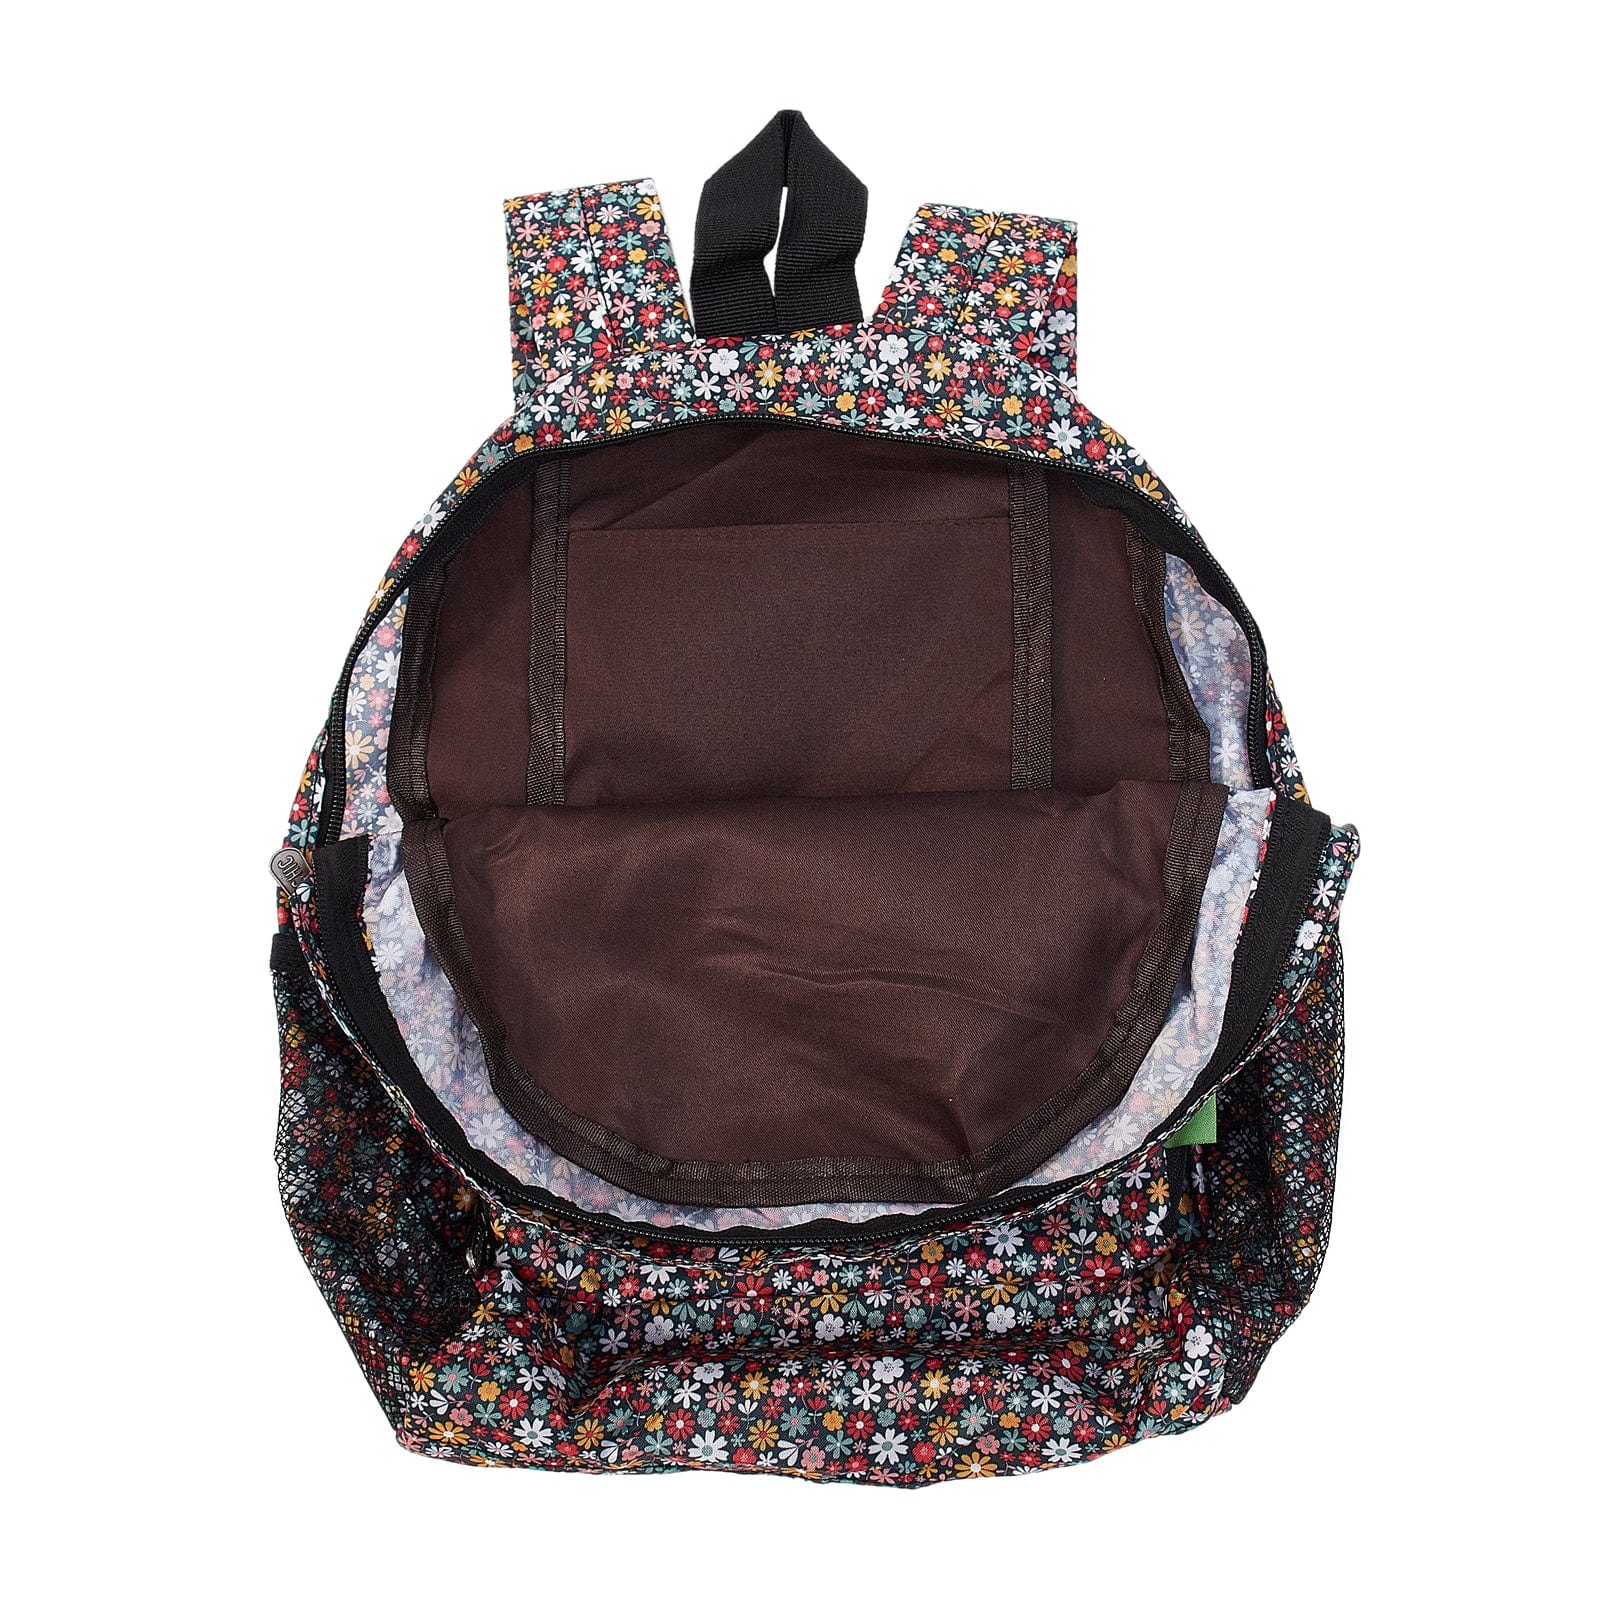 Eco Chic Black Eco Chic Lightweight Foldable Mini Backpack Ditsy